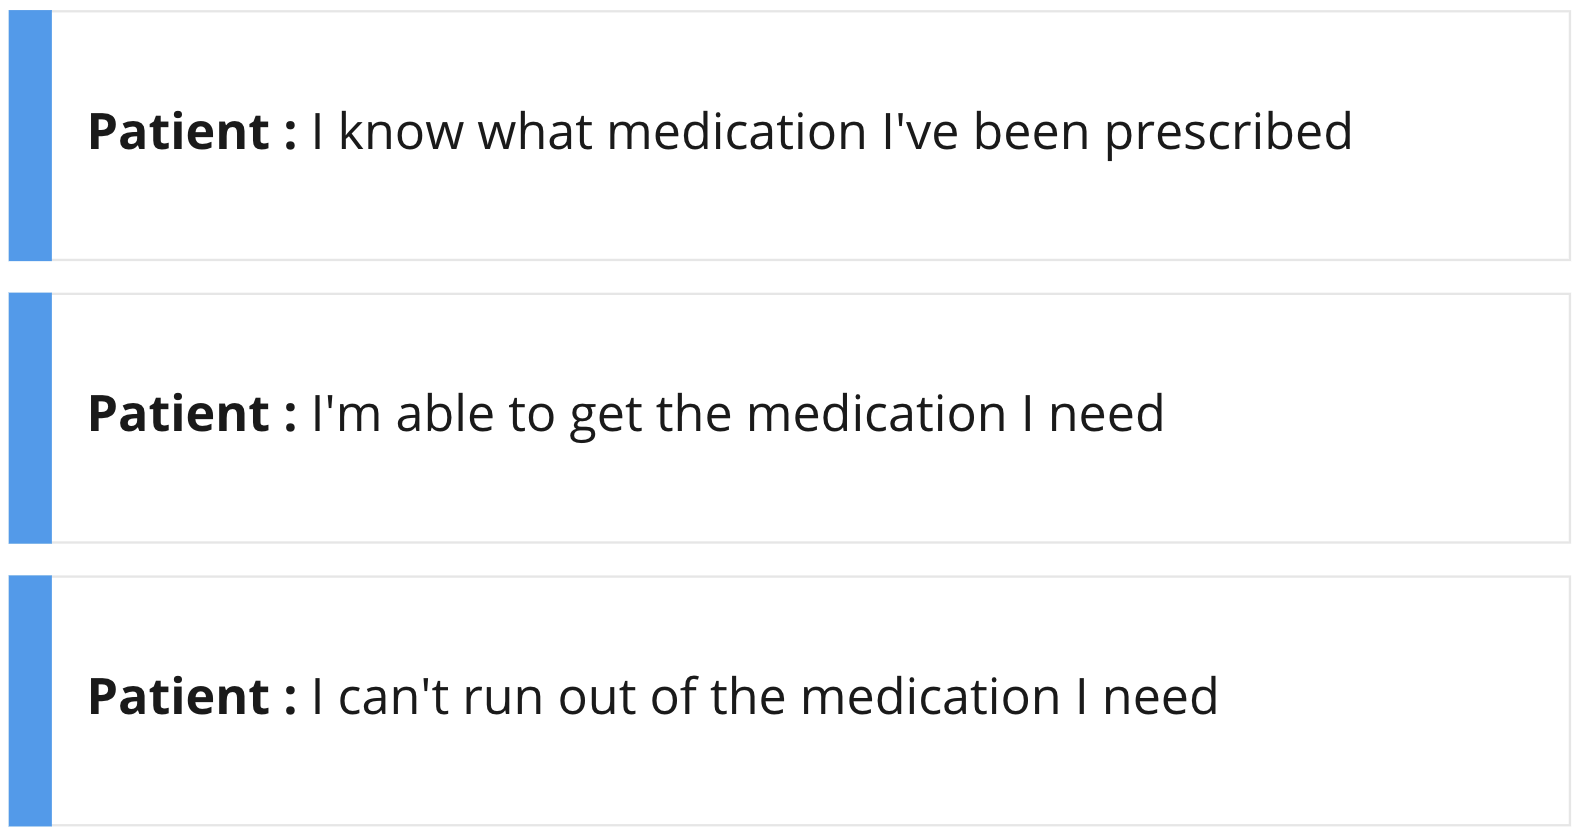 Patient clusters of activity, knowing what medication they've been prescribed, are able to get the medication they need, and can't run out of their medication